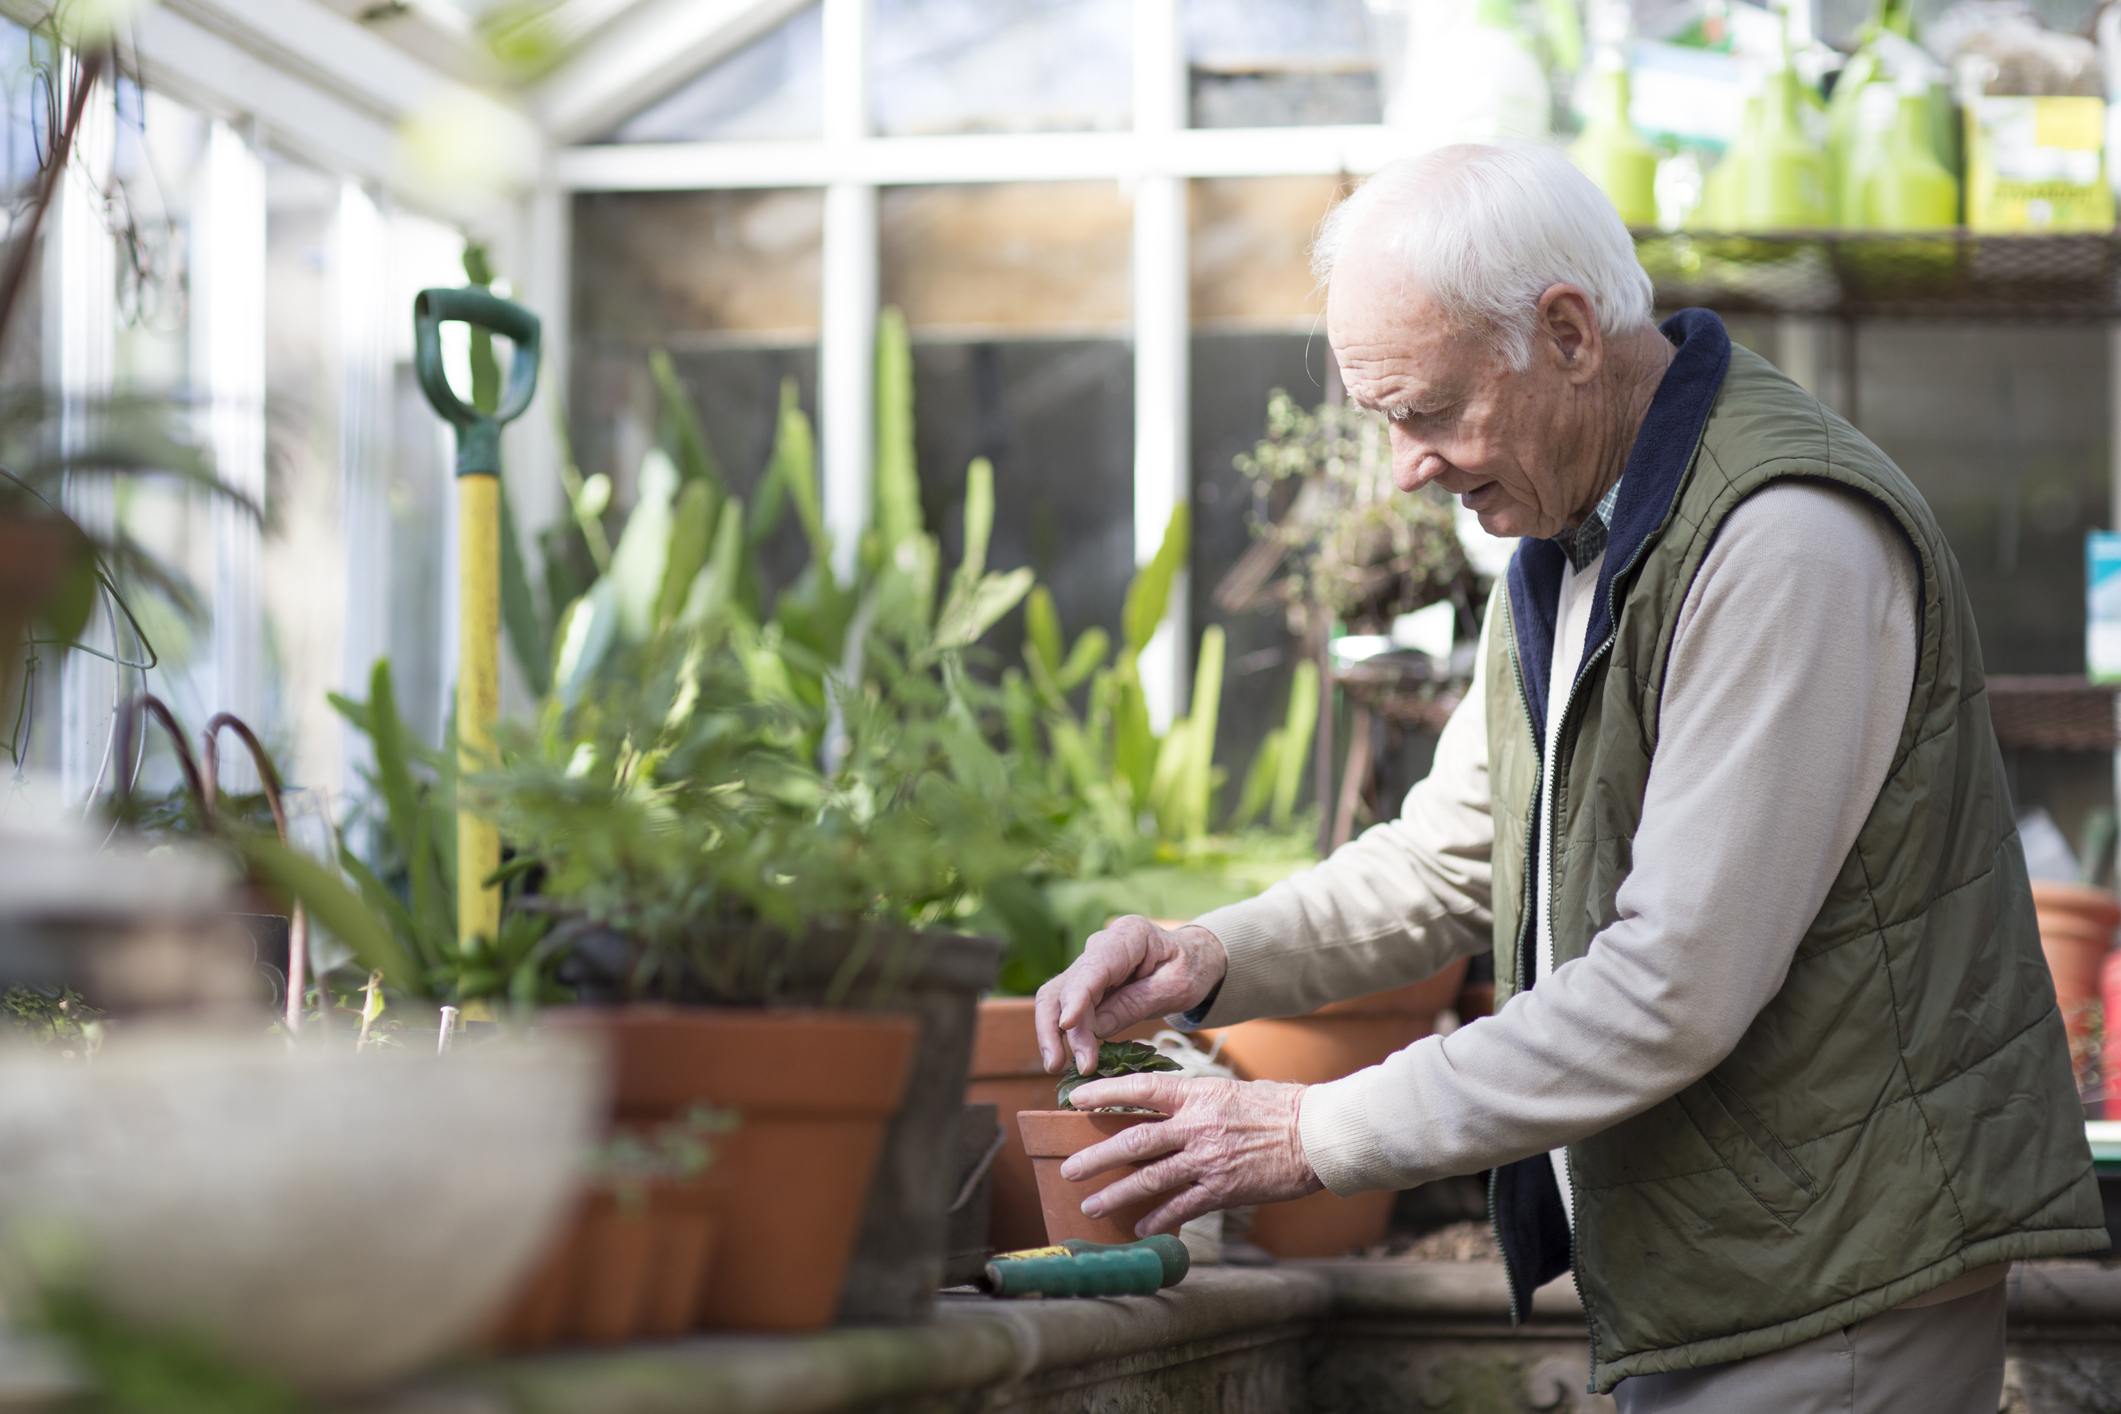 Senior man gardening in a greenhouse. (Getty Images)